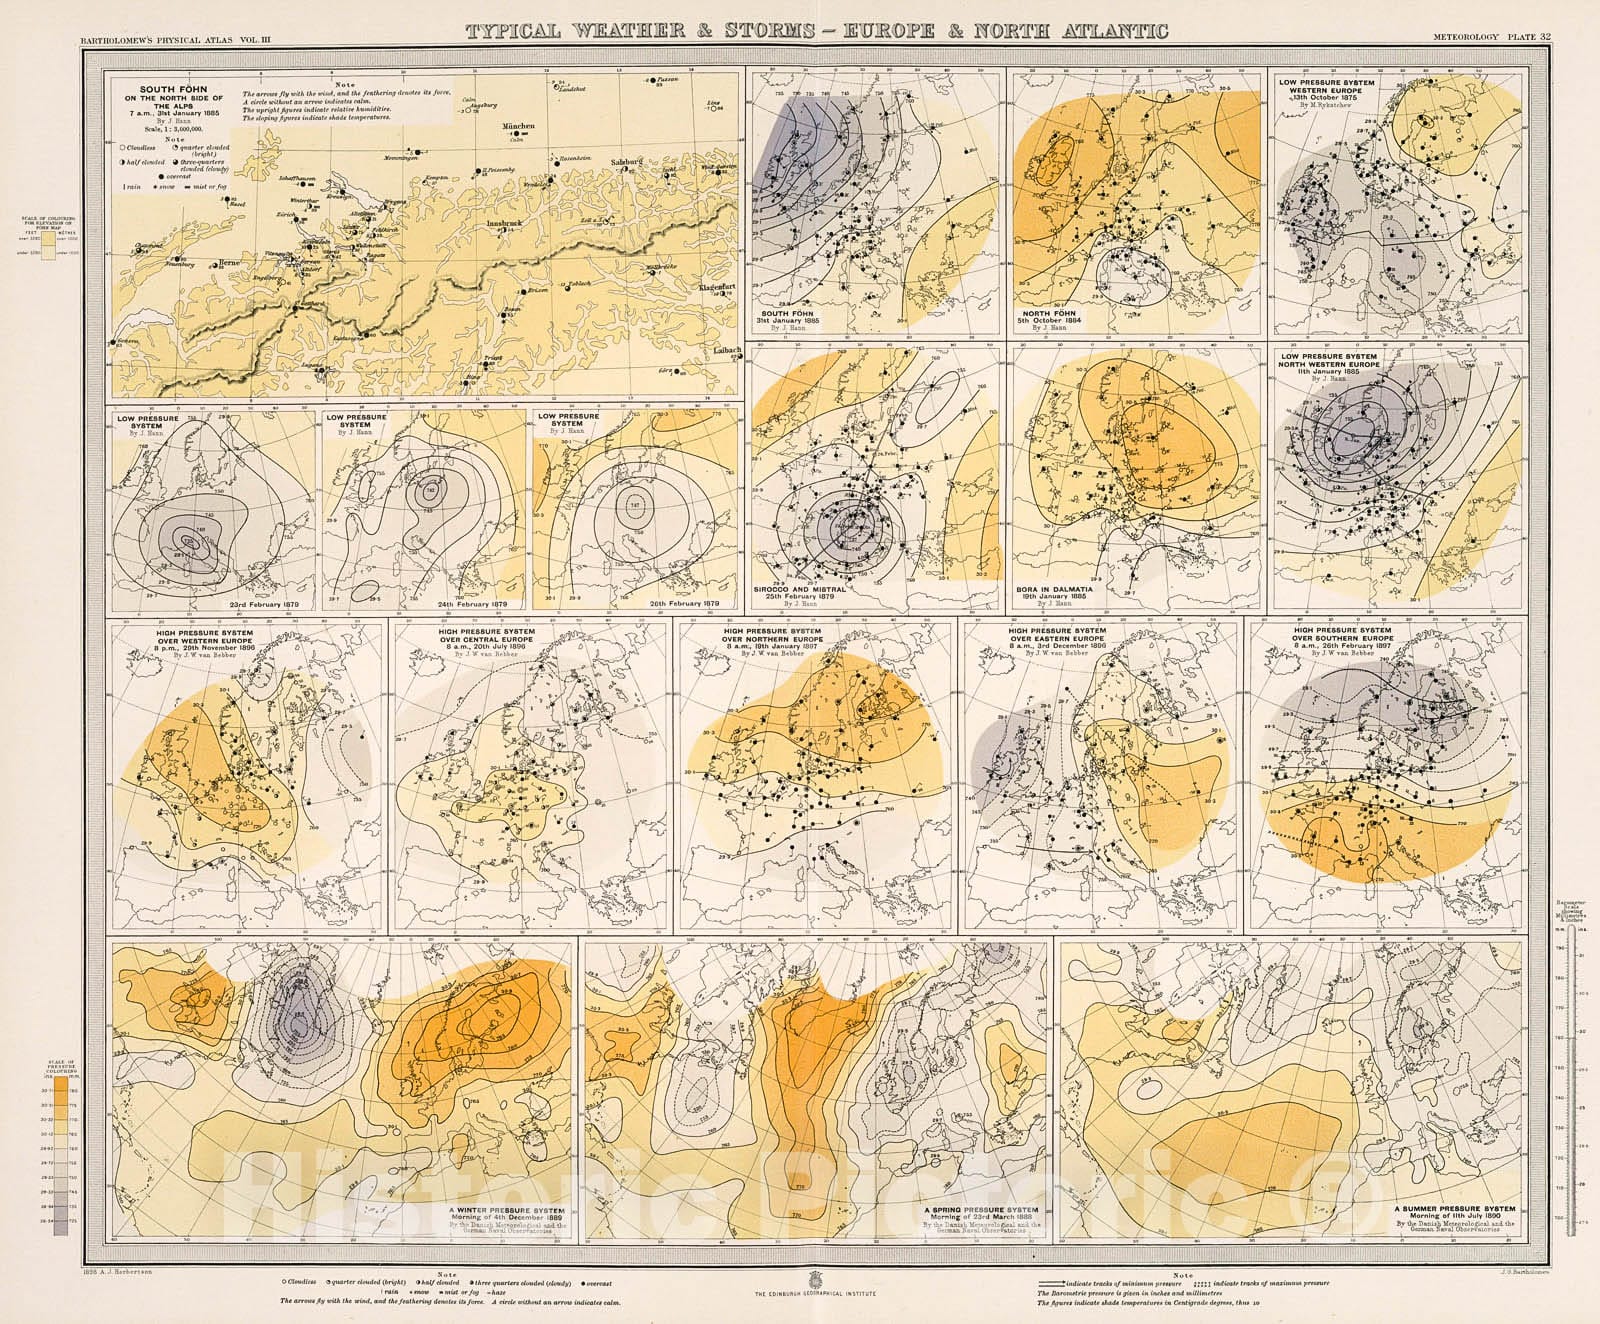 Historic Map : Plate 32. Typical Weather & Storms - Europe & North Atlantic., 1899, Vintage Wall Decor